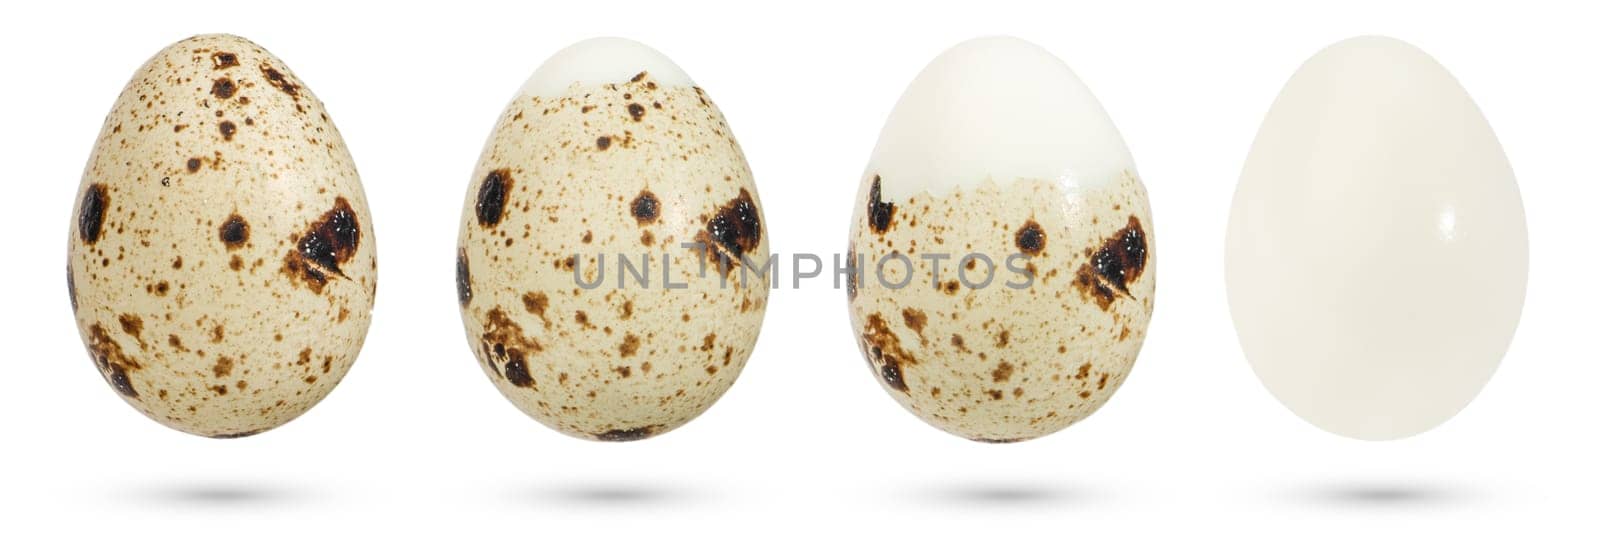 Quail eggs. Boiled eggs in the process of peeling the shell on a white isolated background. The concept of boiled eggs, cooking diet food, healthy eating. by SERSOL